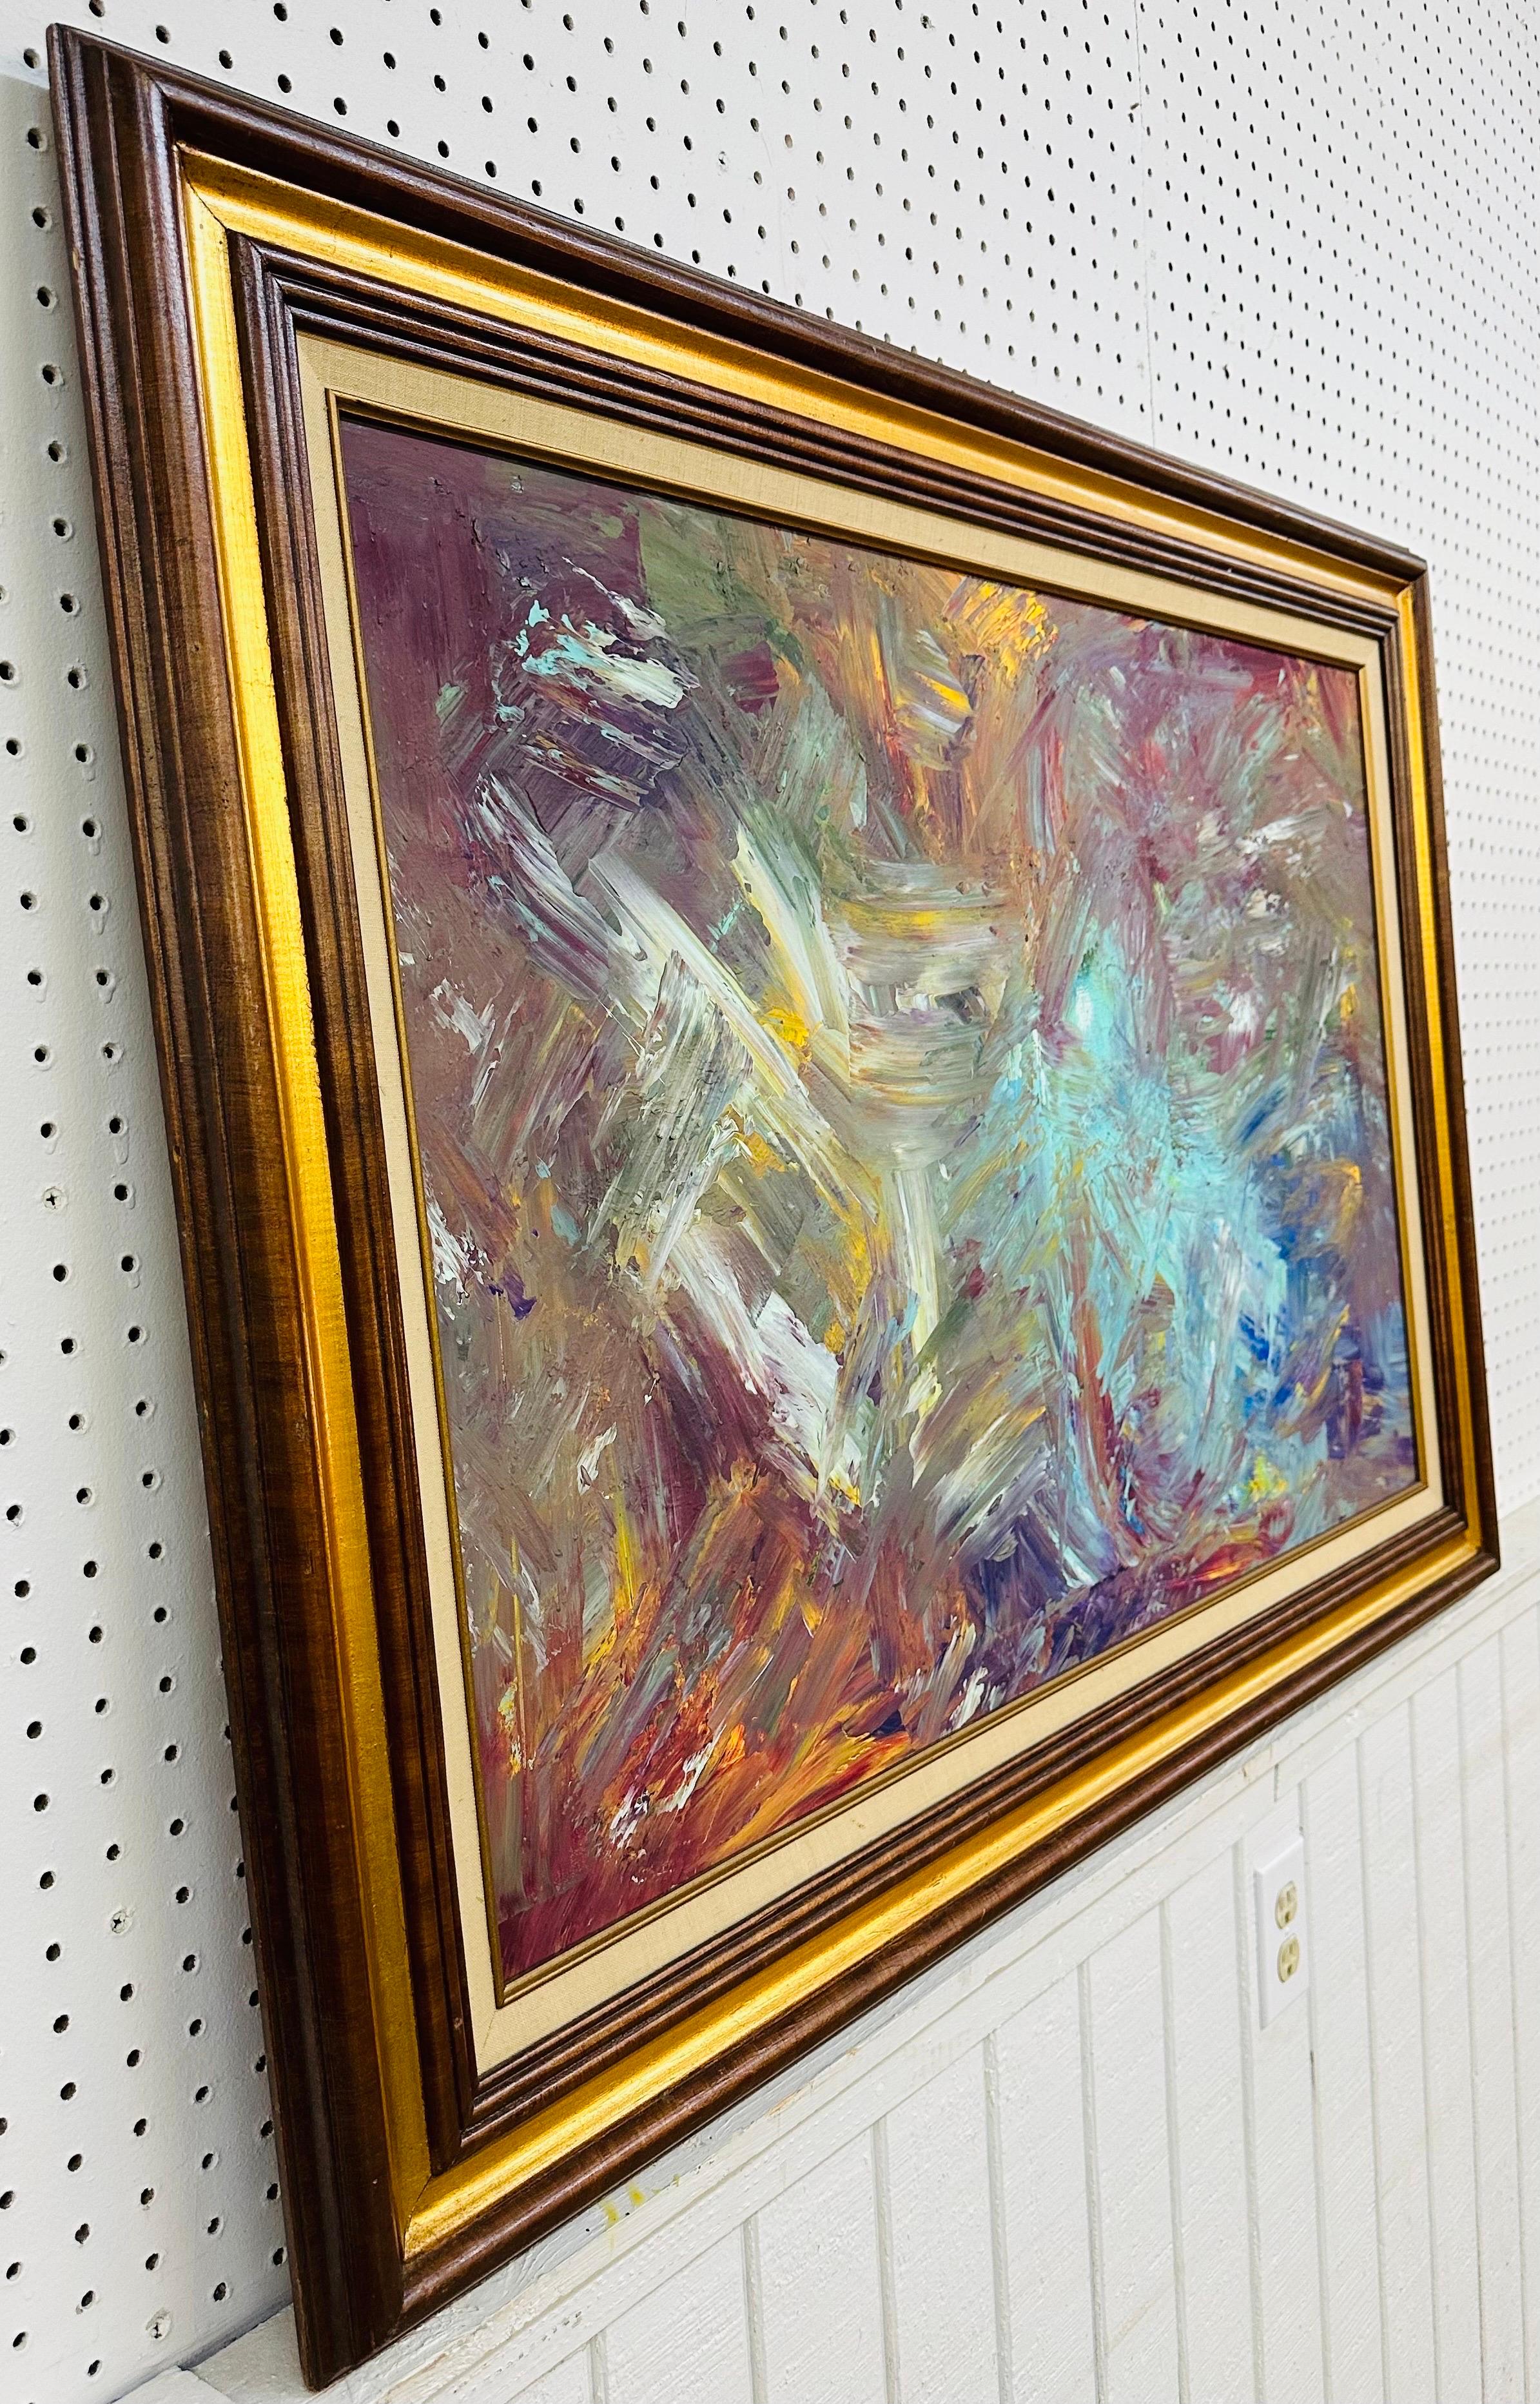 Mid-Century Modern Modern Expressionist Abstract Painting Signed Mullin For Sale